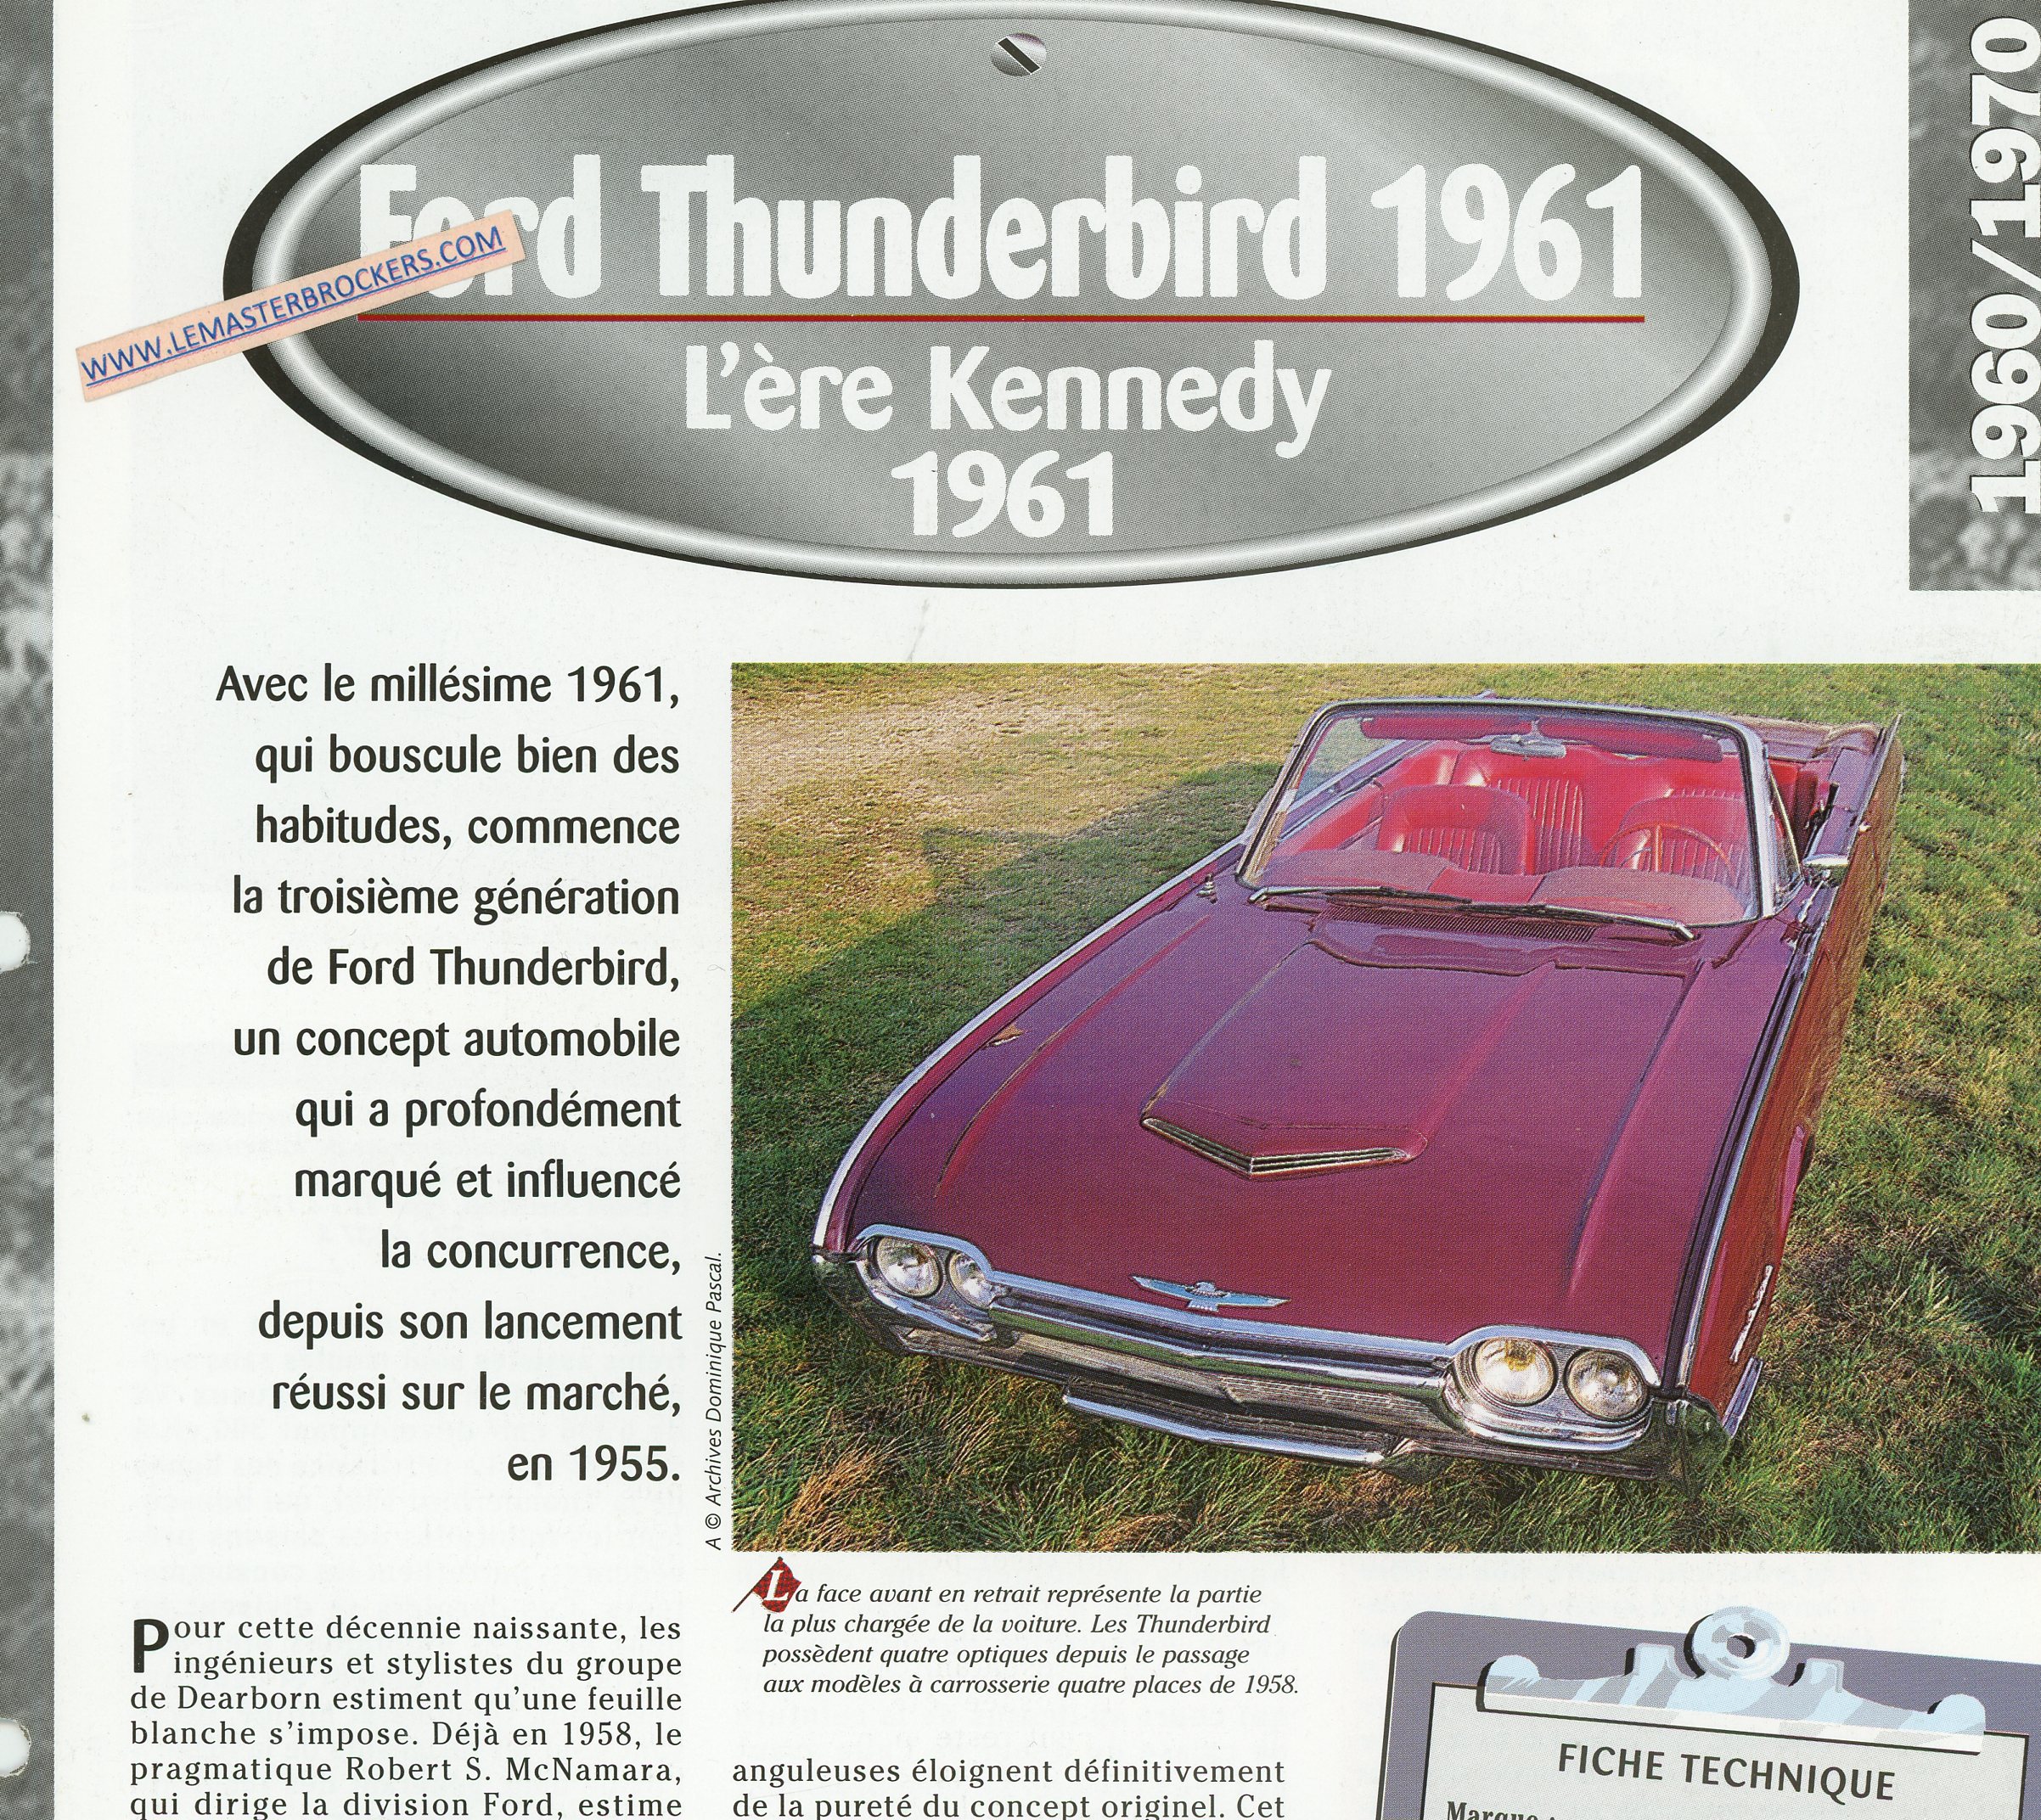 FORD-THUNDERBIRD-TYPE-76A-1961-FICHE-TECHNIQUE-LEMASTERBROCKERS-COM